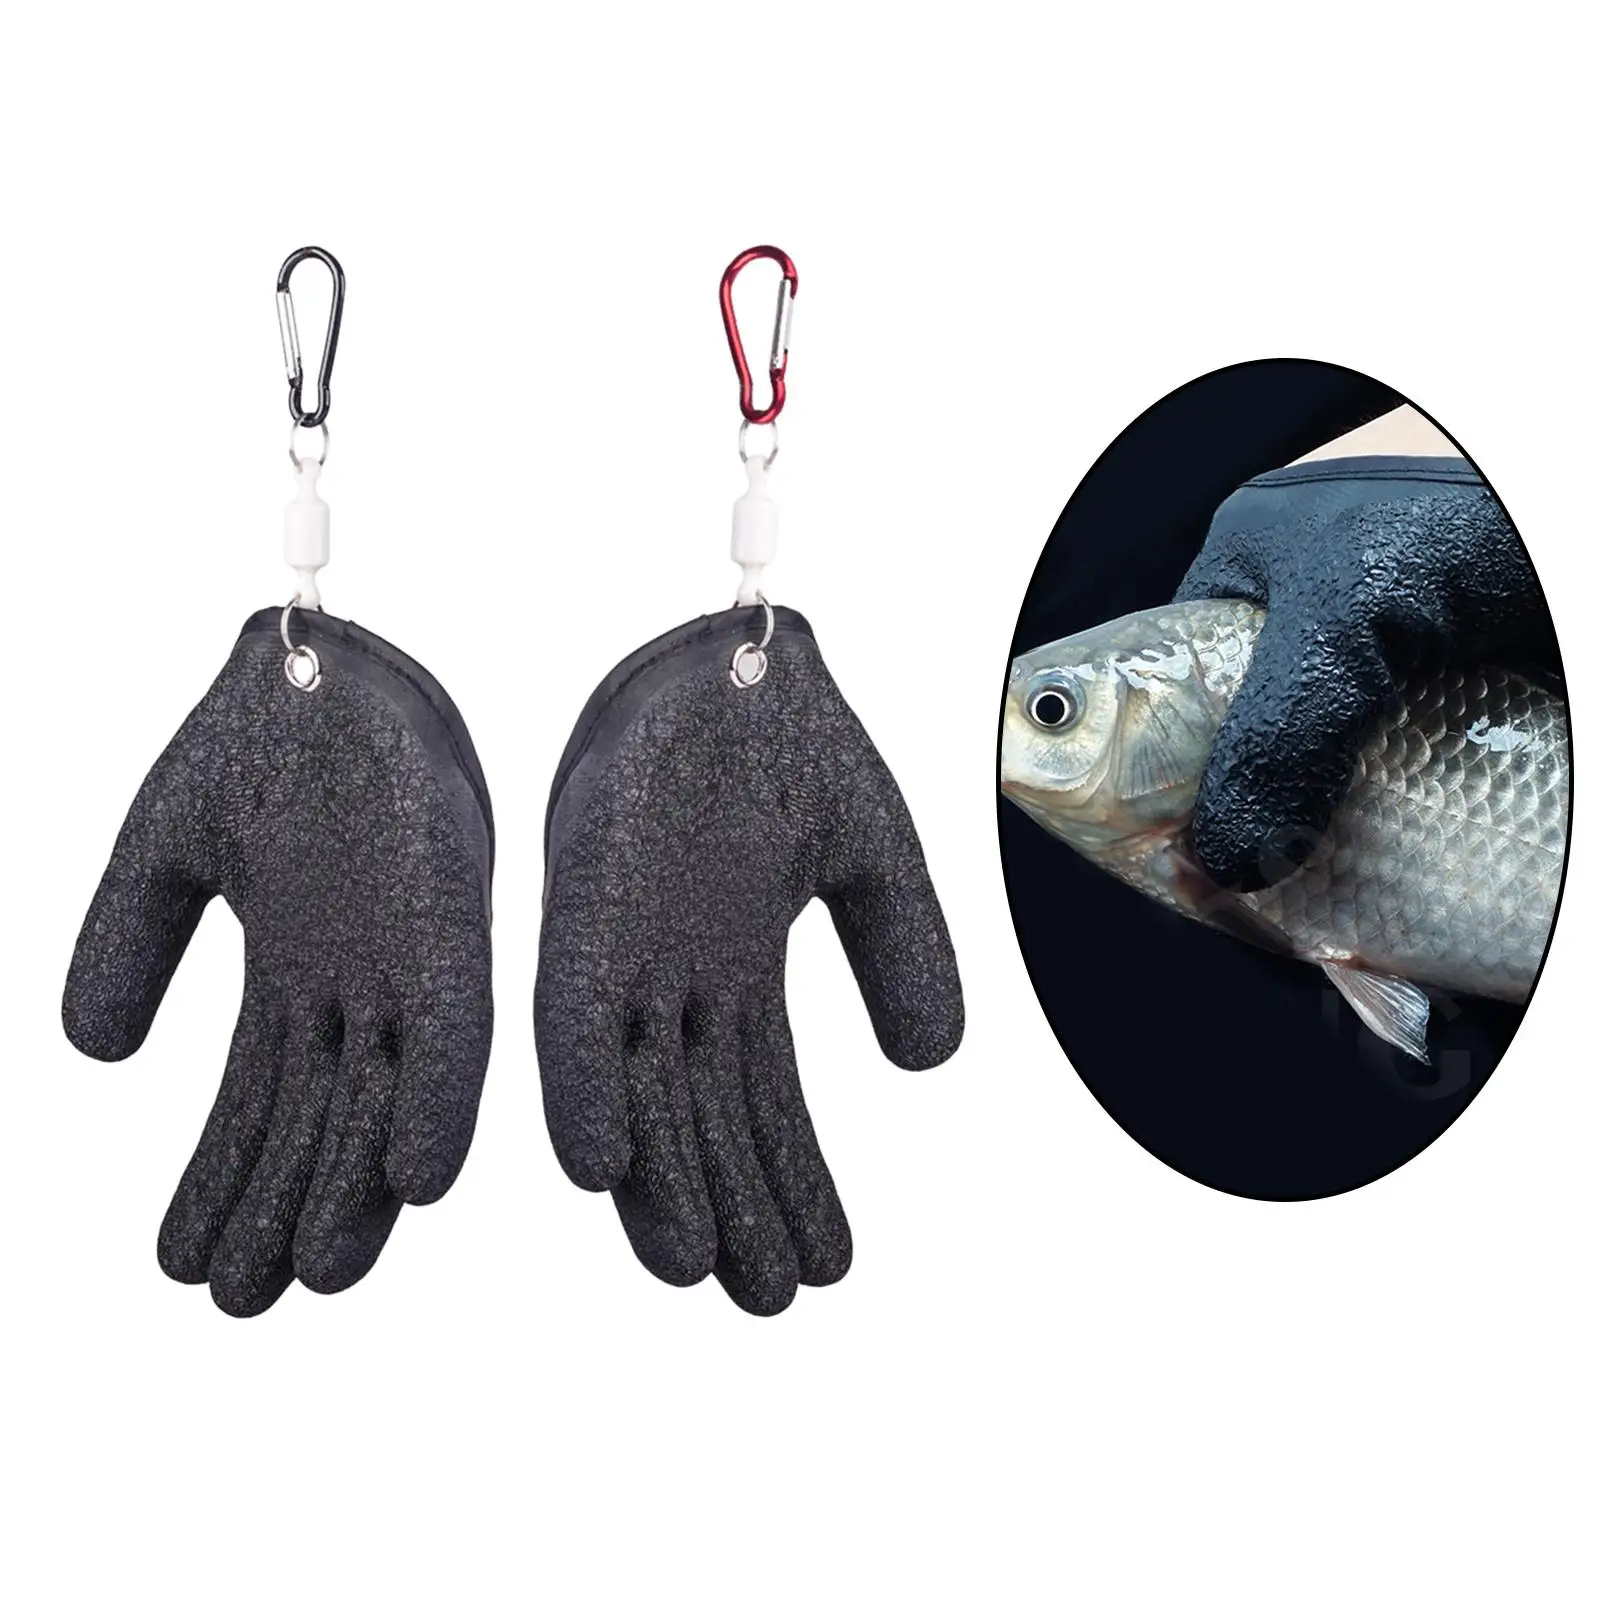 Fishing Puncture Proof Gloves w/Magnet Release Waterproof Fish Hunting Glove